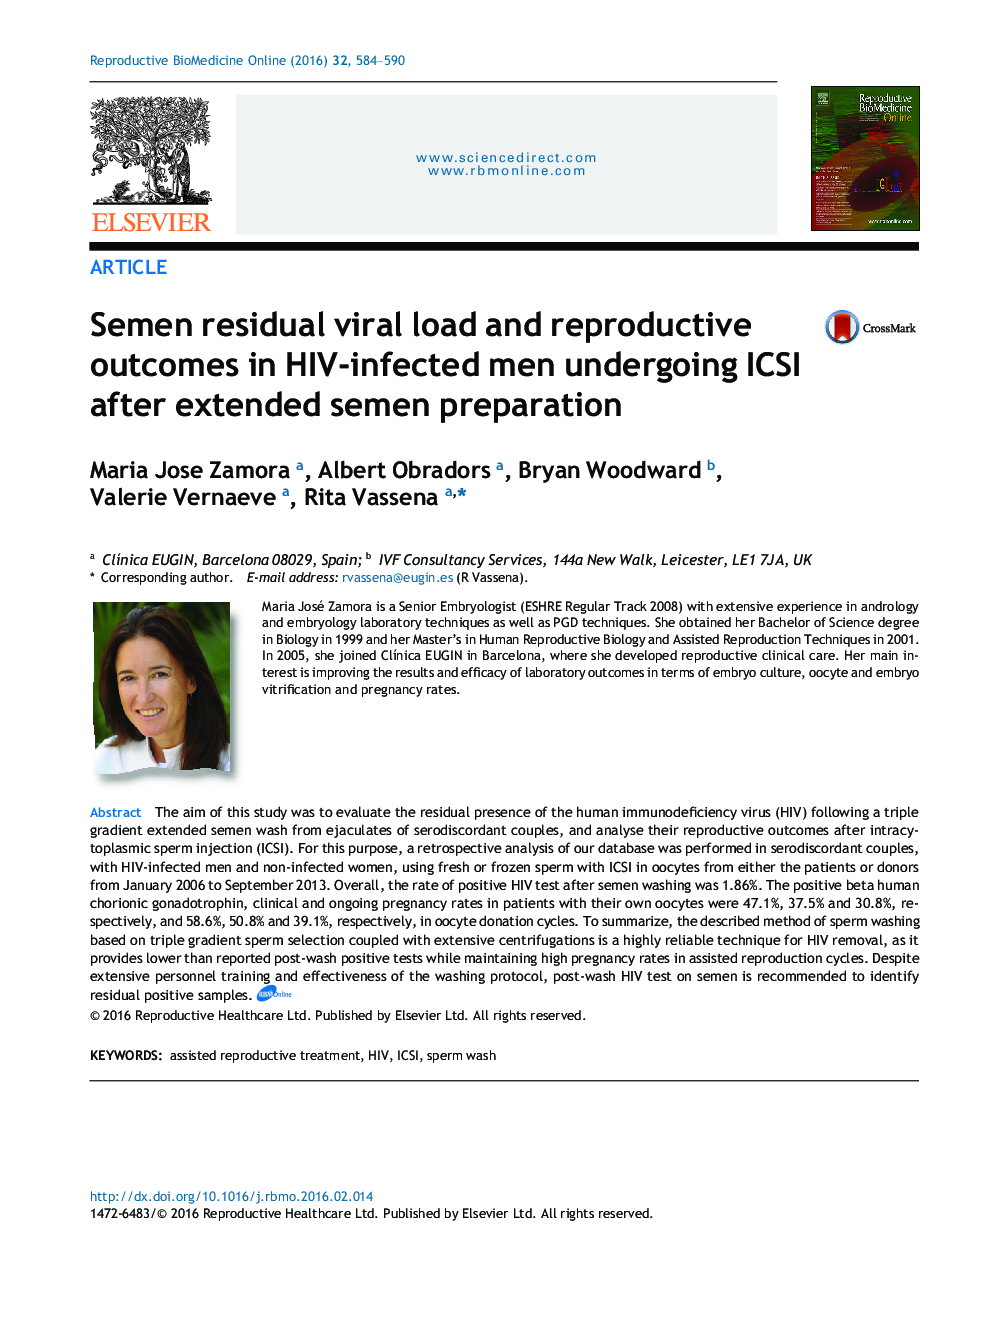 Semen residual viral load and reproductive outcomes in HIV-infected men undergoing ICSI after extended semen preparation